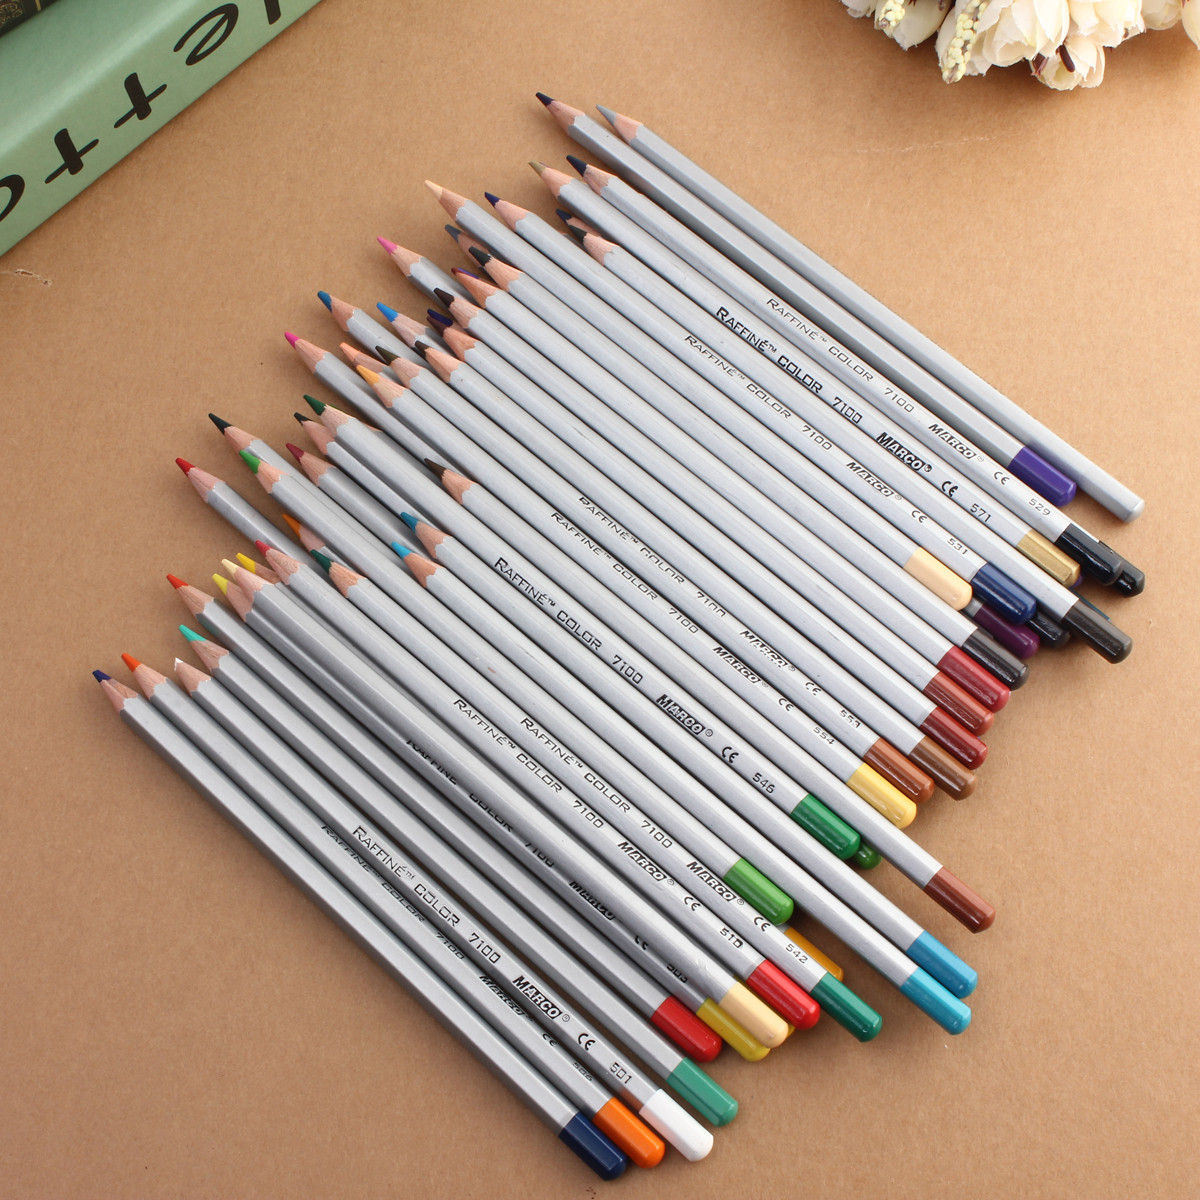 72-Colors-Art-Drawing-Pencil-Set-Oil-Non-toxic-Pencils-Painting-Sketching-Drawing-Stationery-School--973251-15